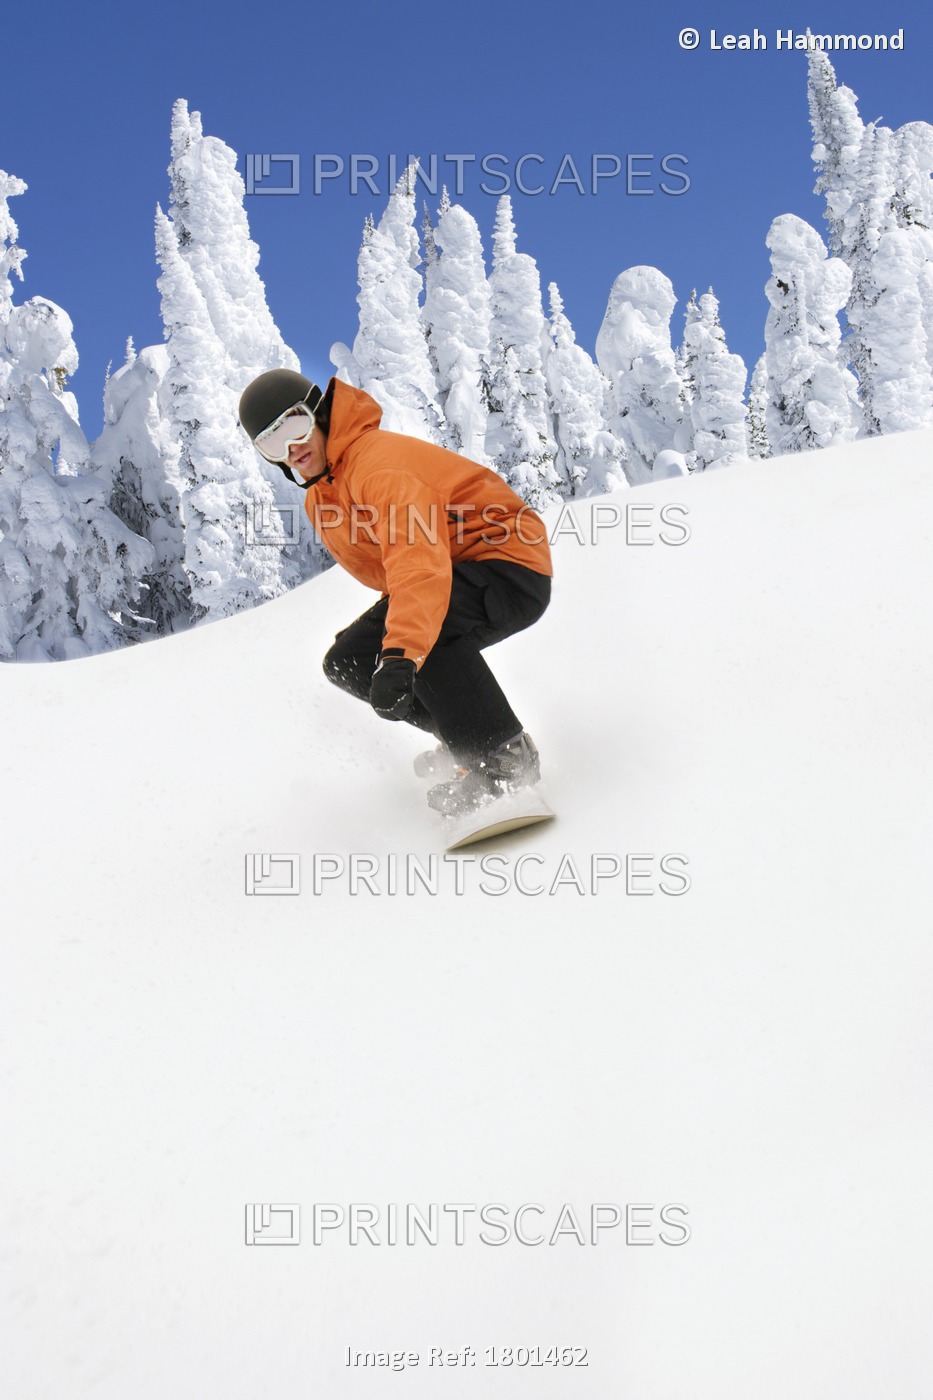 Snowboarder Going Down Snowy Hill